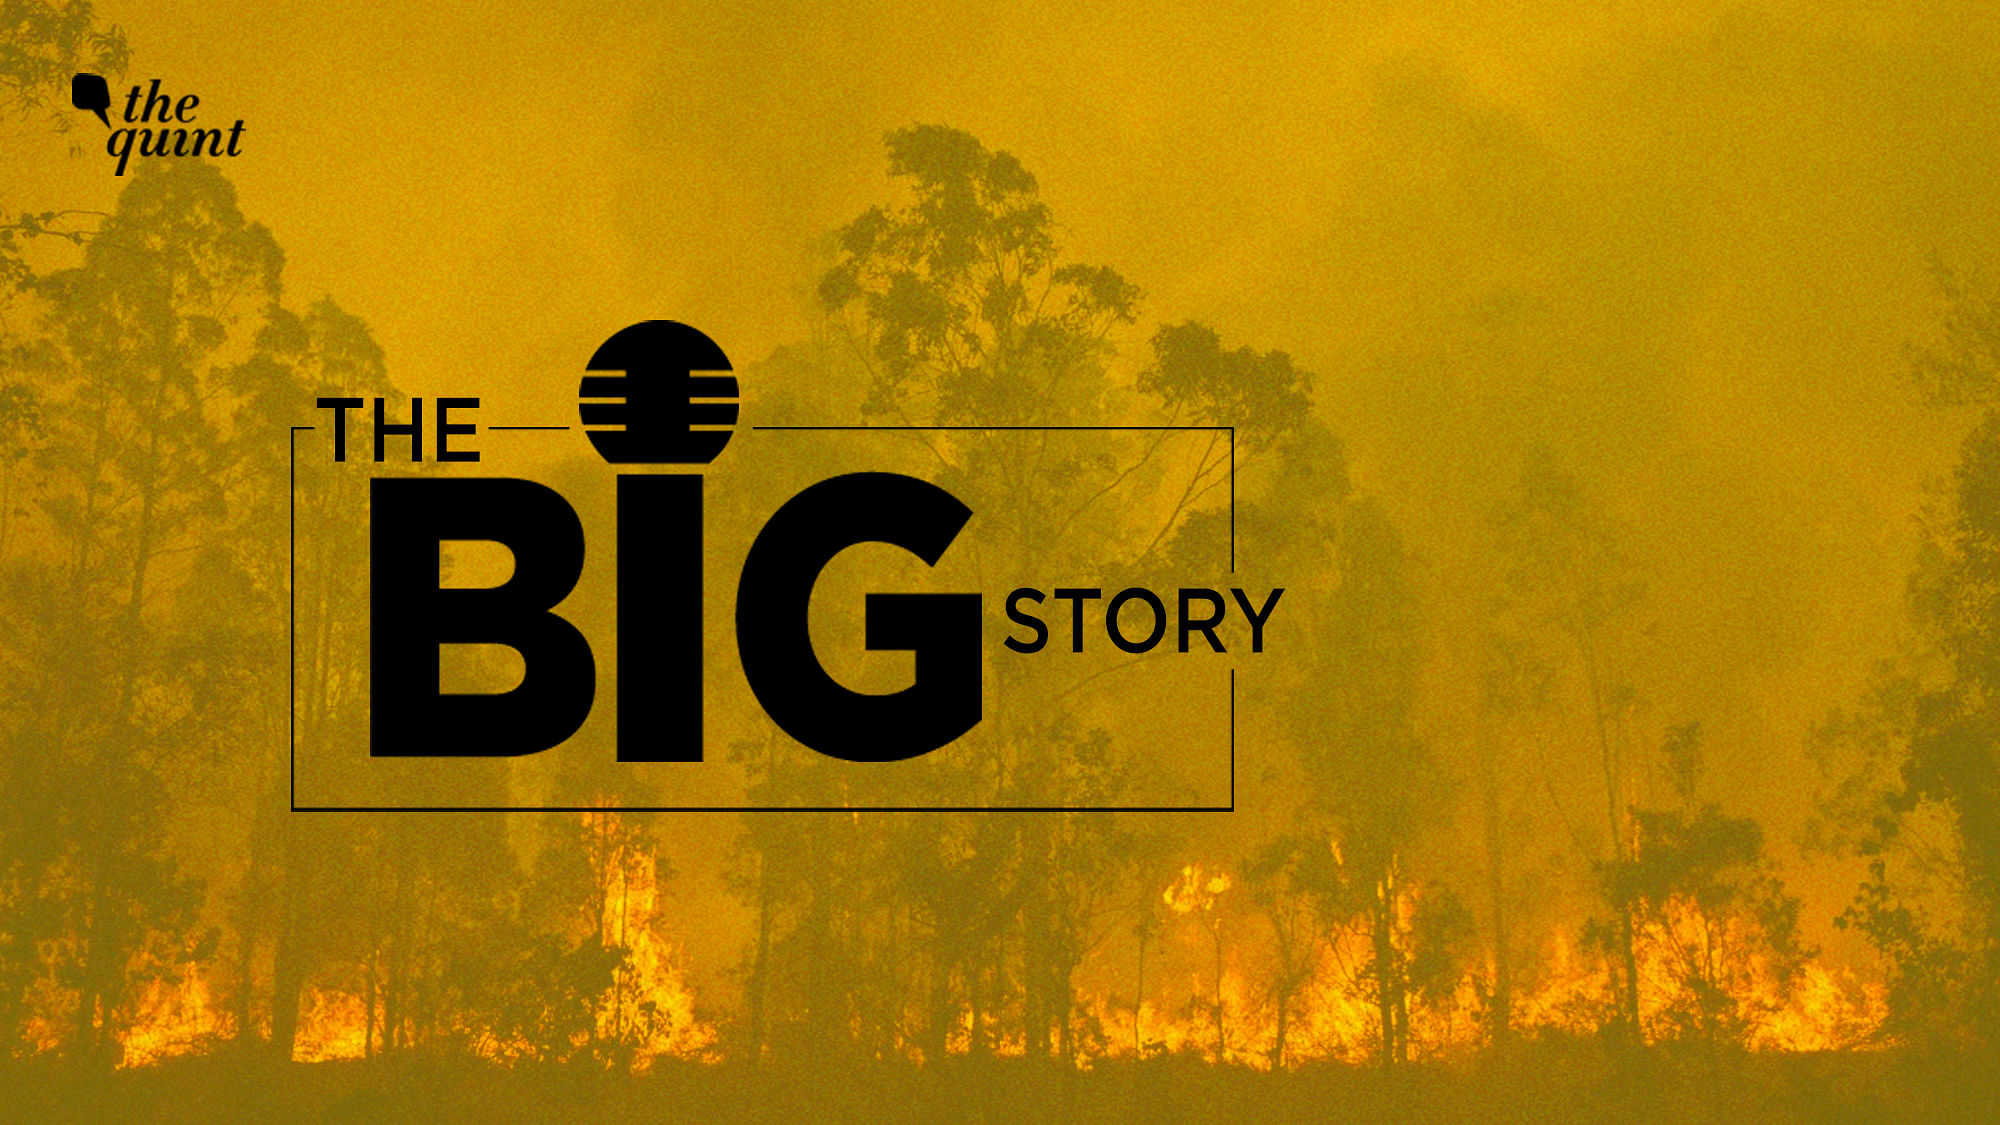 How are forest fires impacting the planet at large?